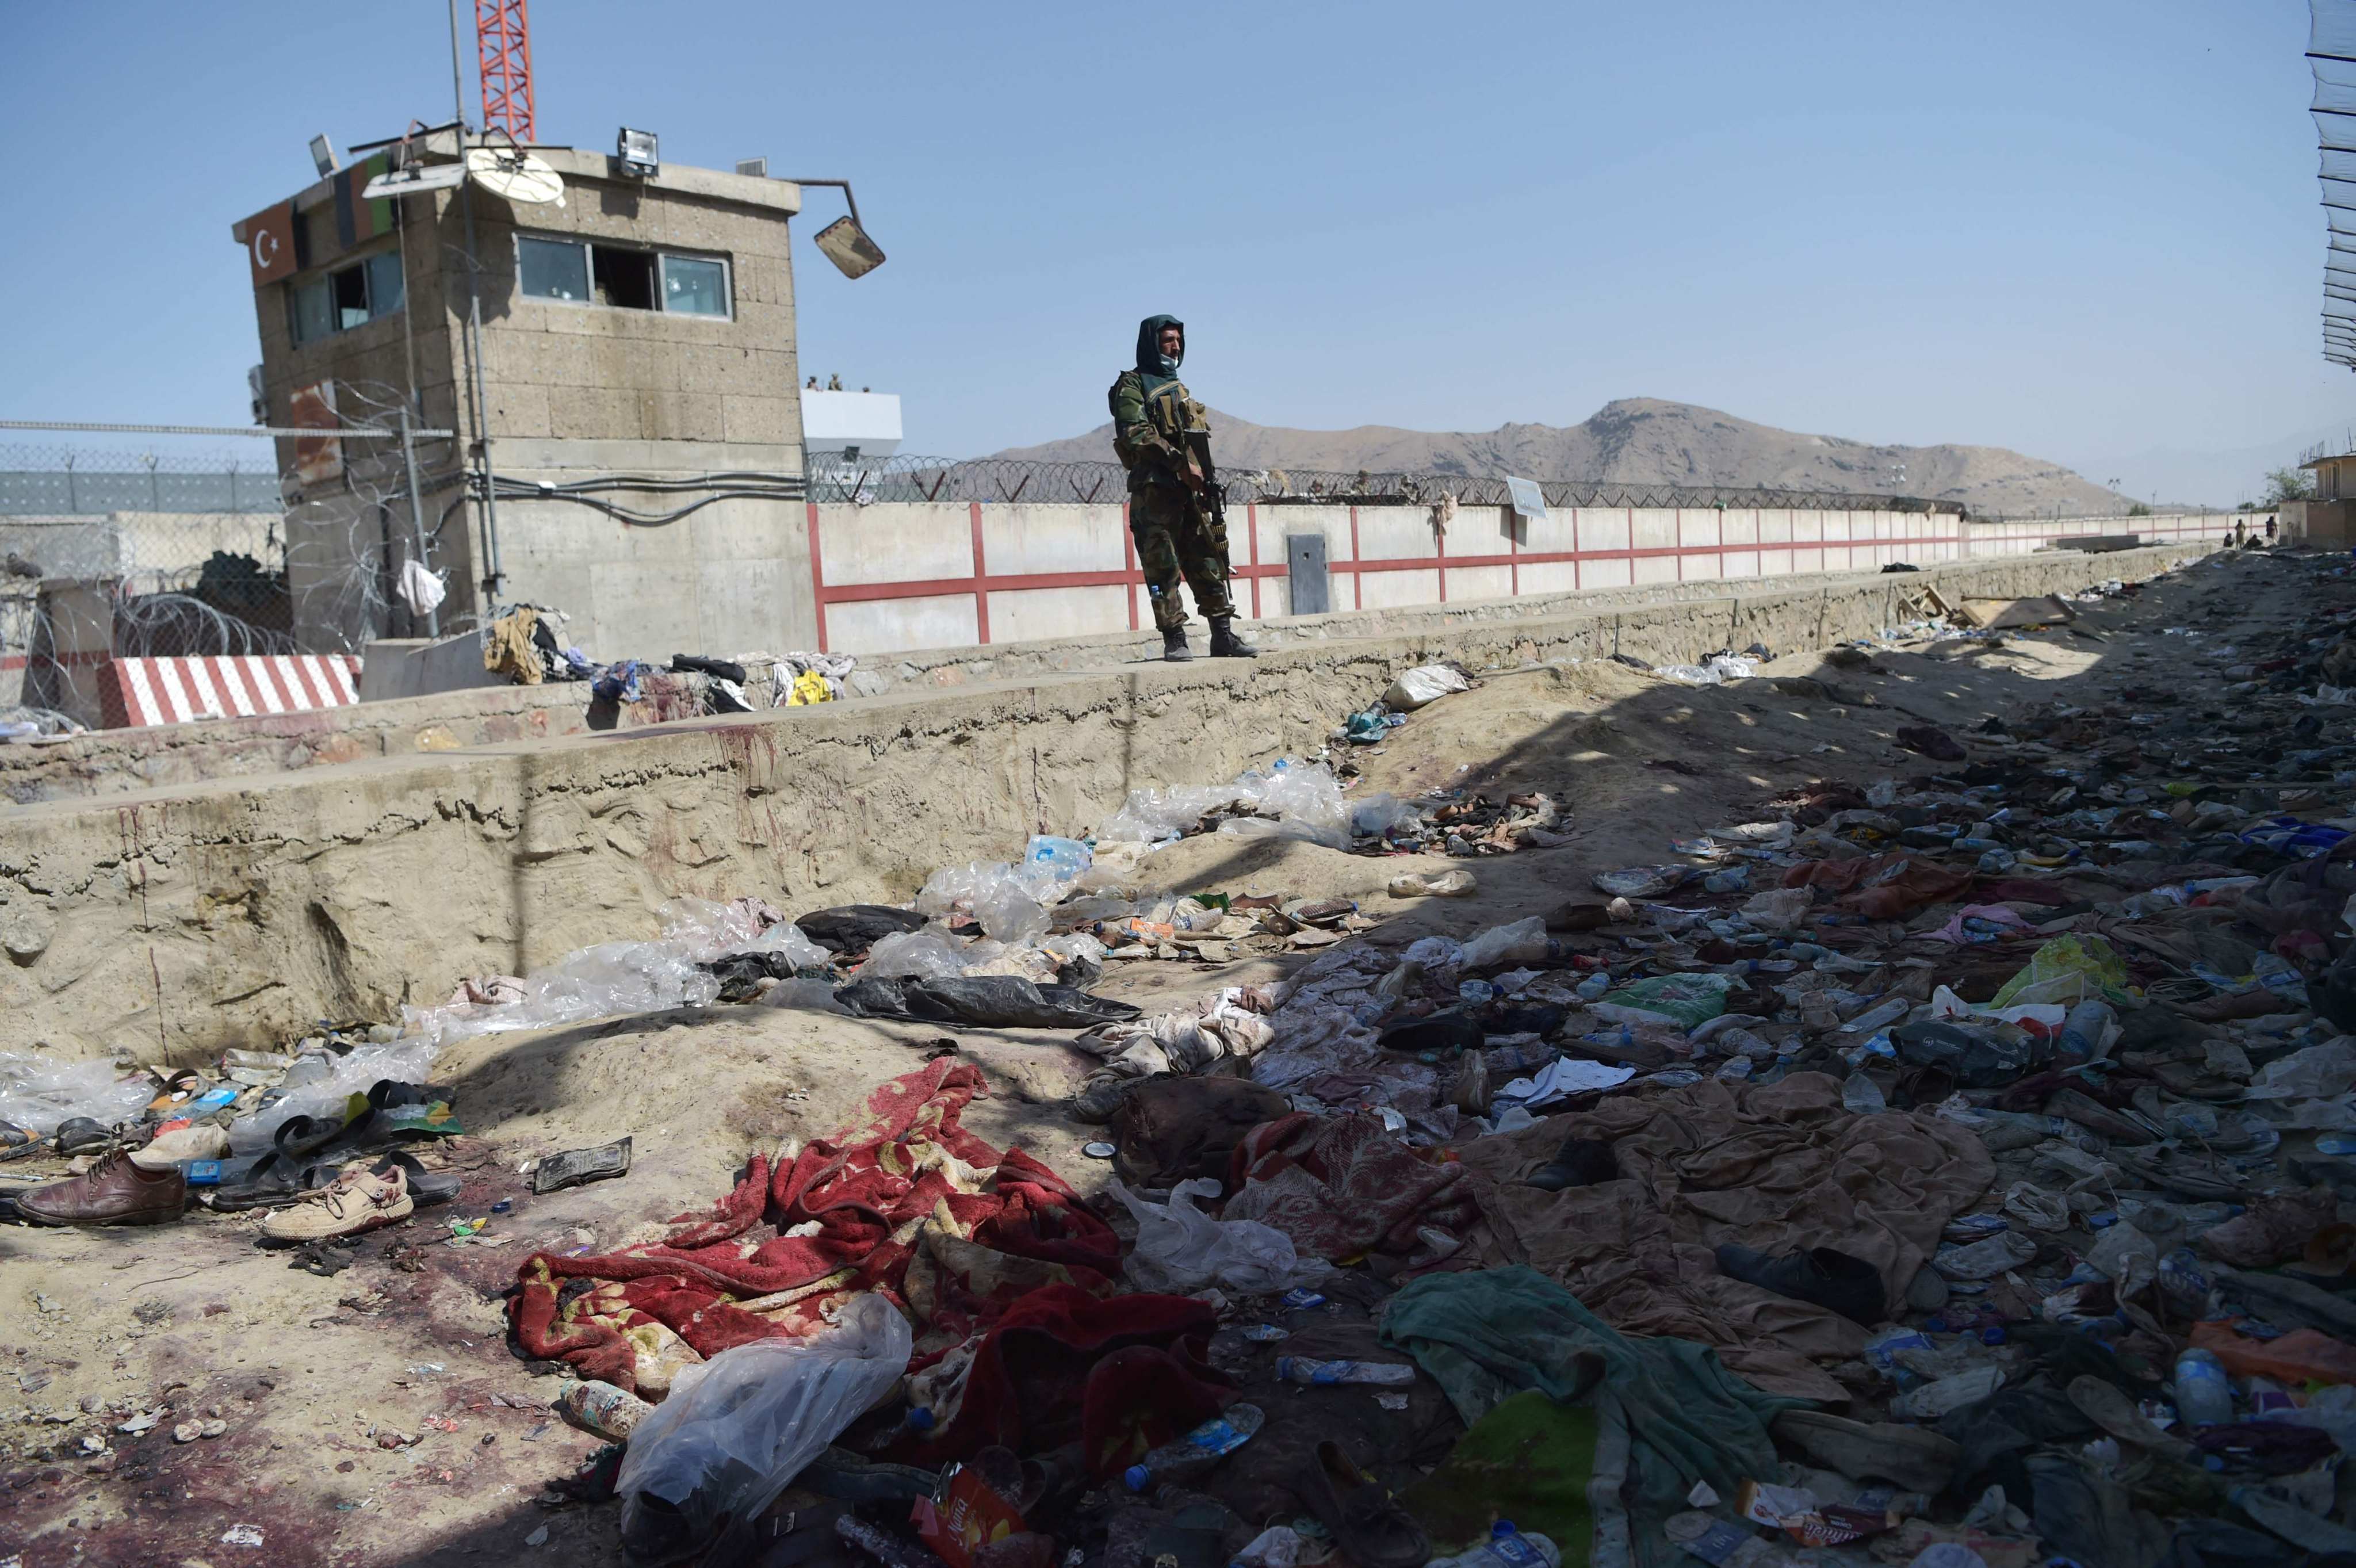 The bombing occurred on August 26, 2021, as US troops were trying to help Americans and Afghans flee in the chaotic aftermath of the Taliban’s takeover. File photo: AFP